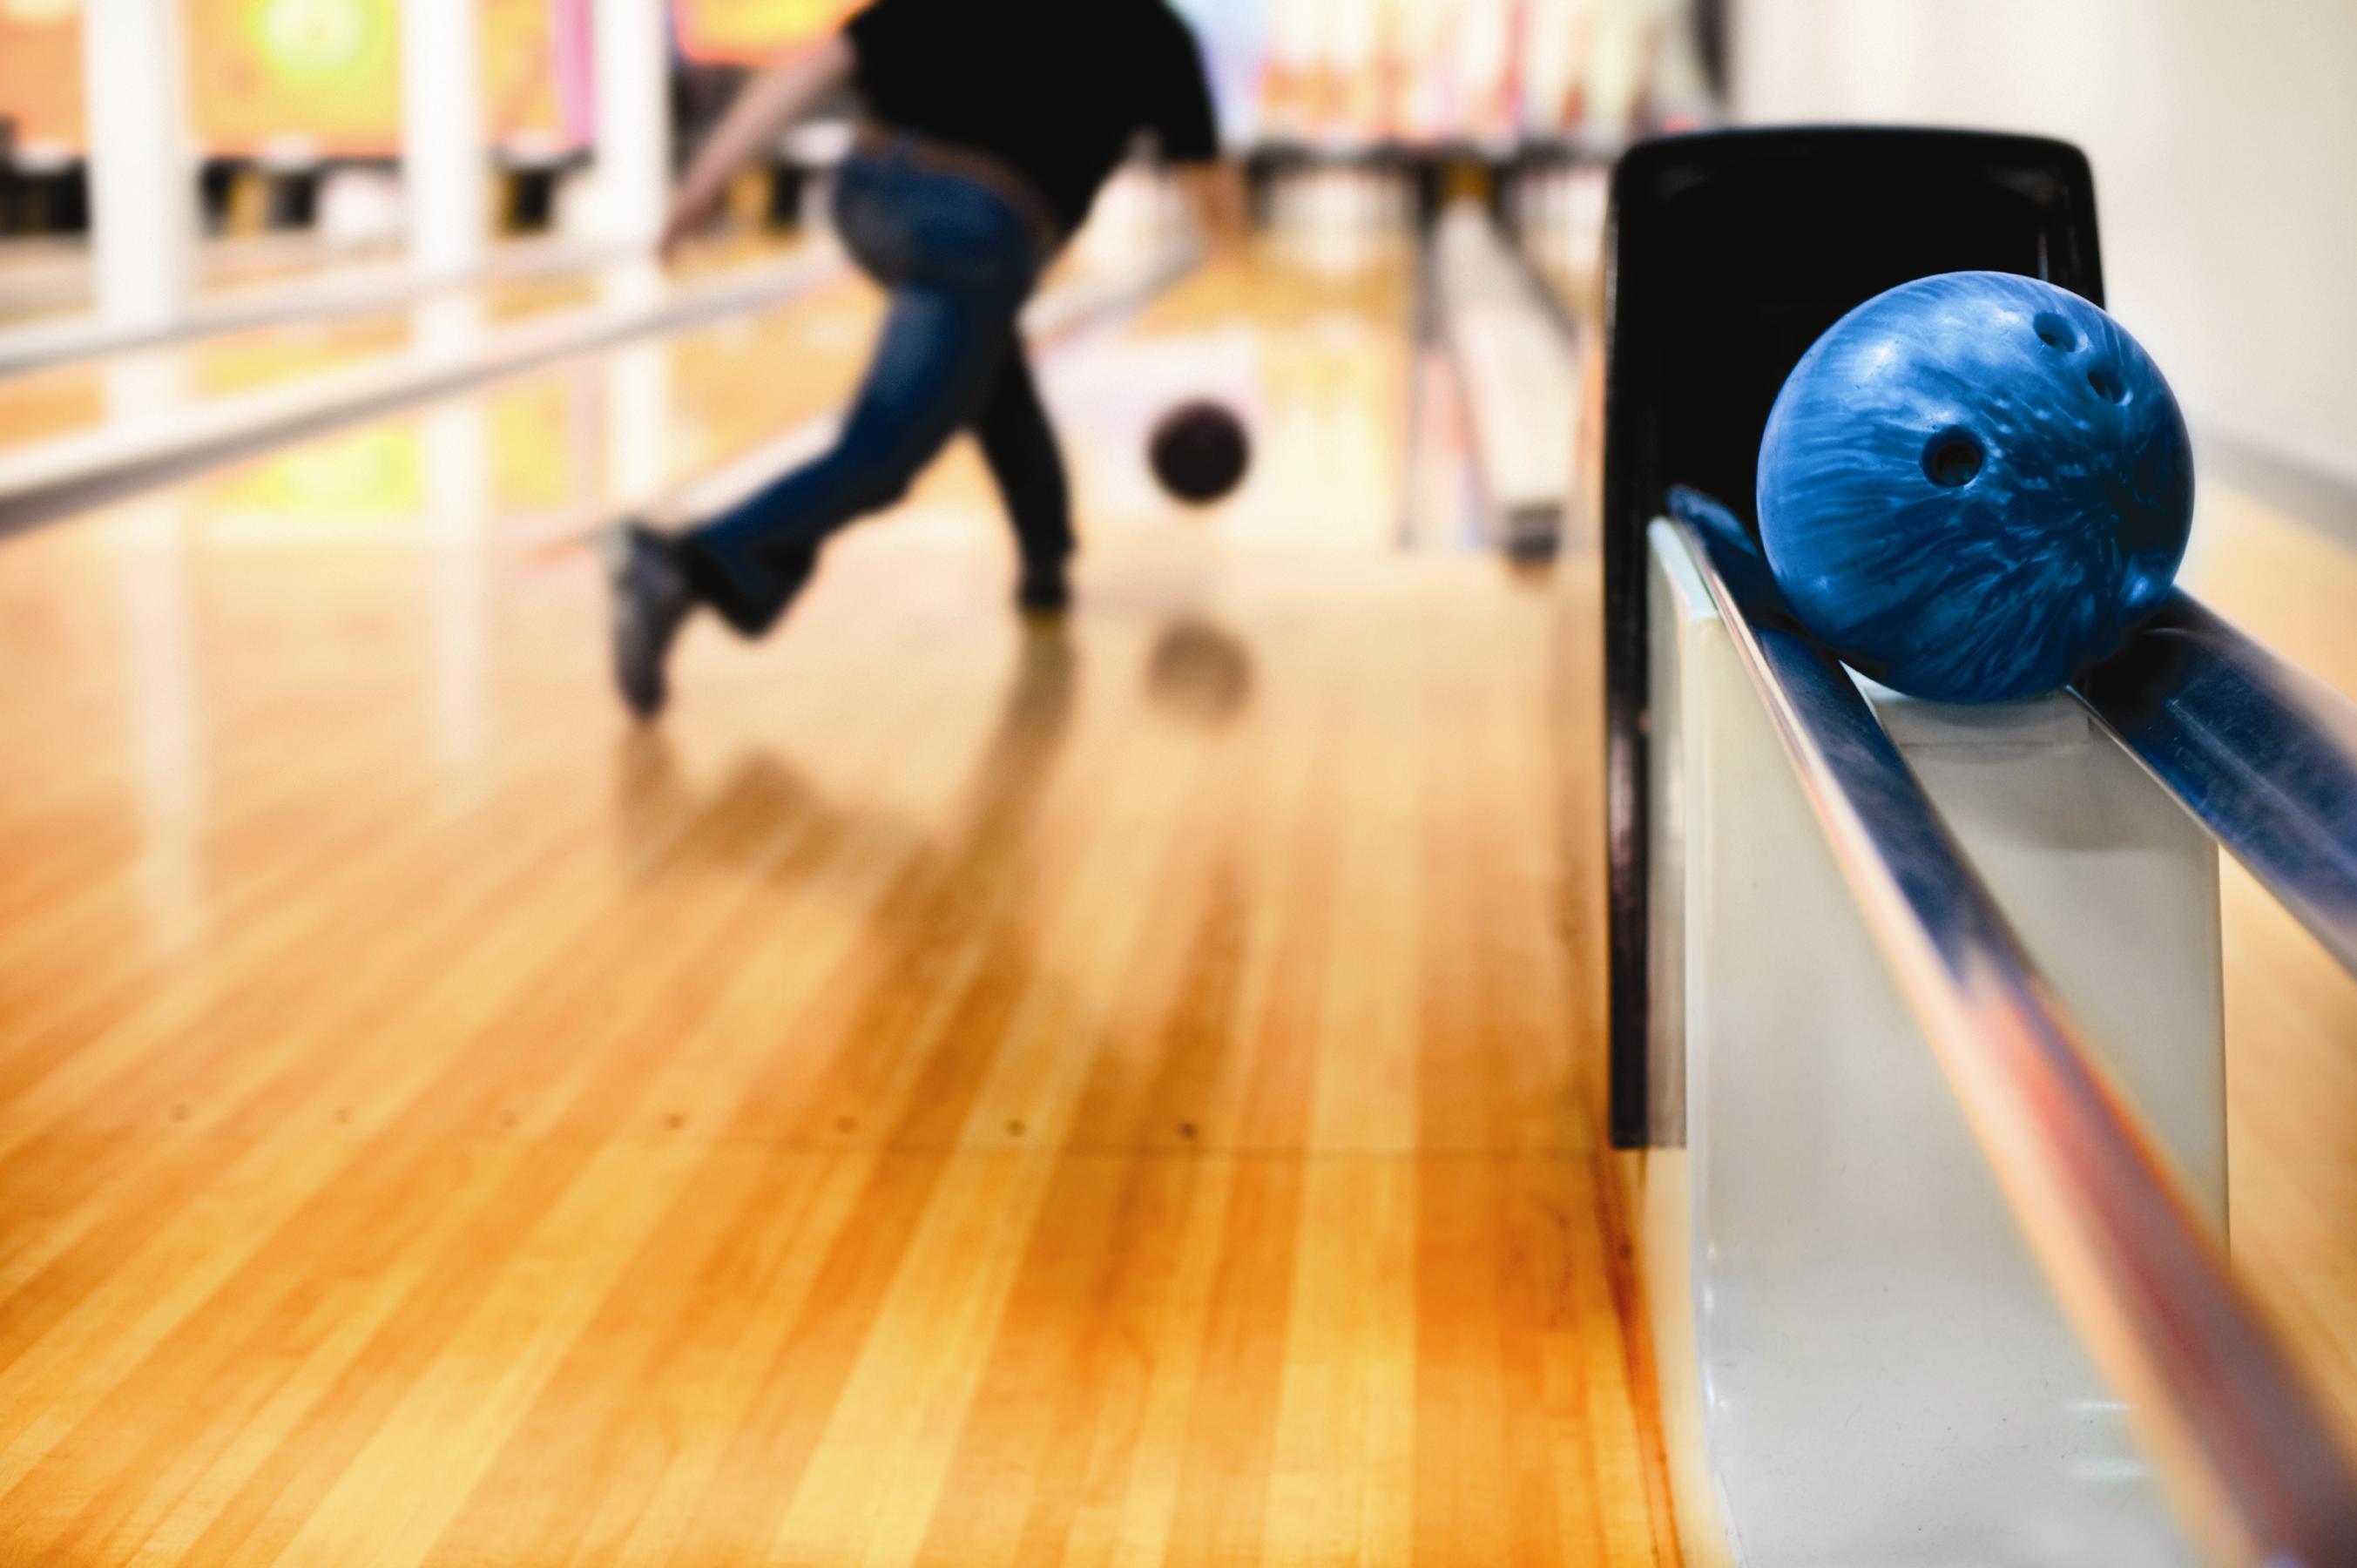 Bowling Wallpaper Image Photo Picture Background